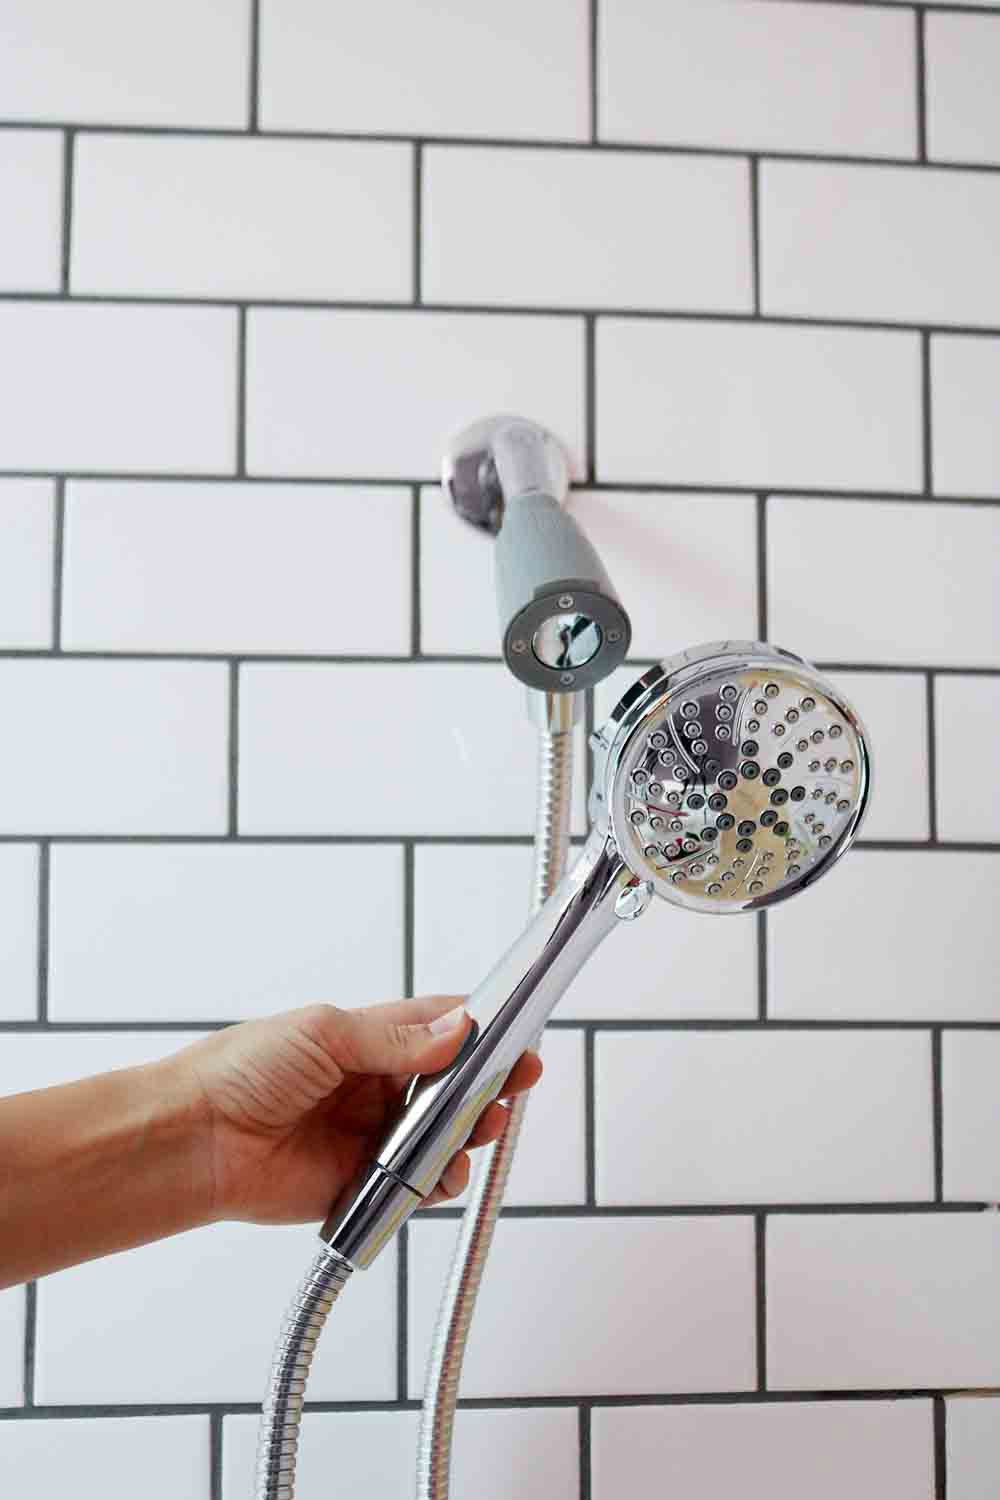 A person attaching a shower head onto a wall.